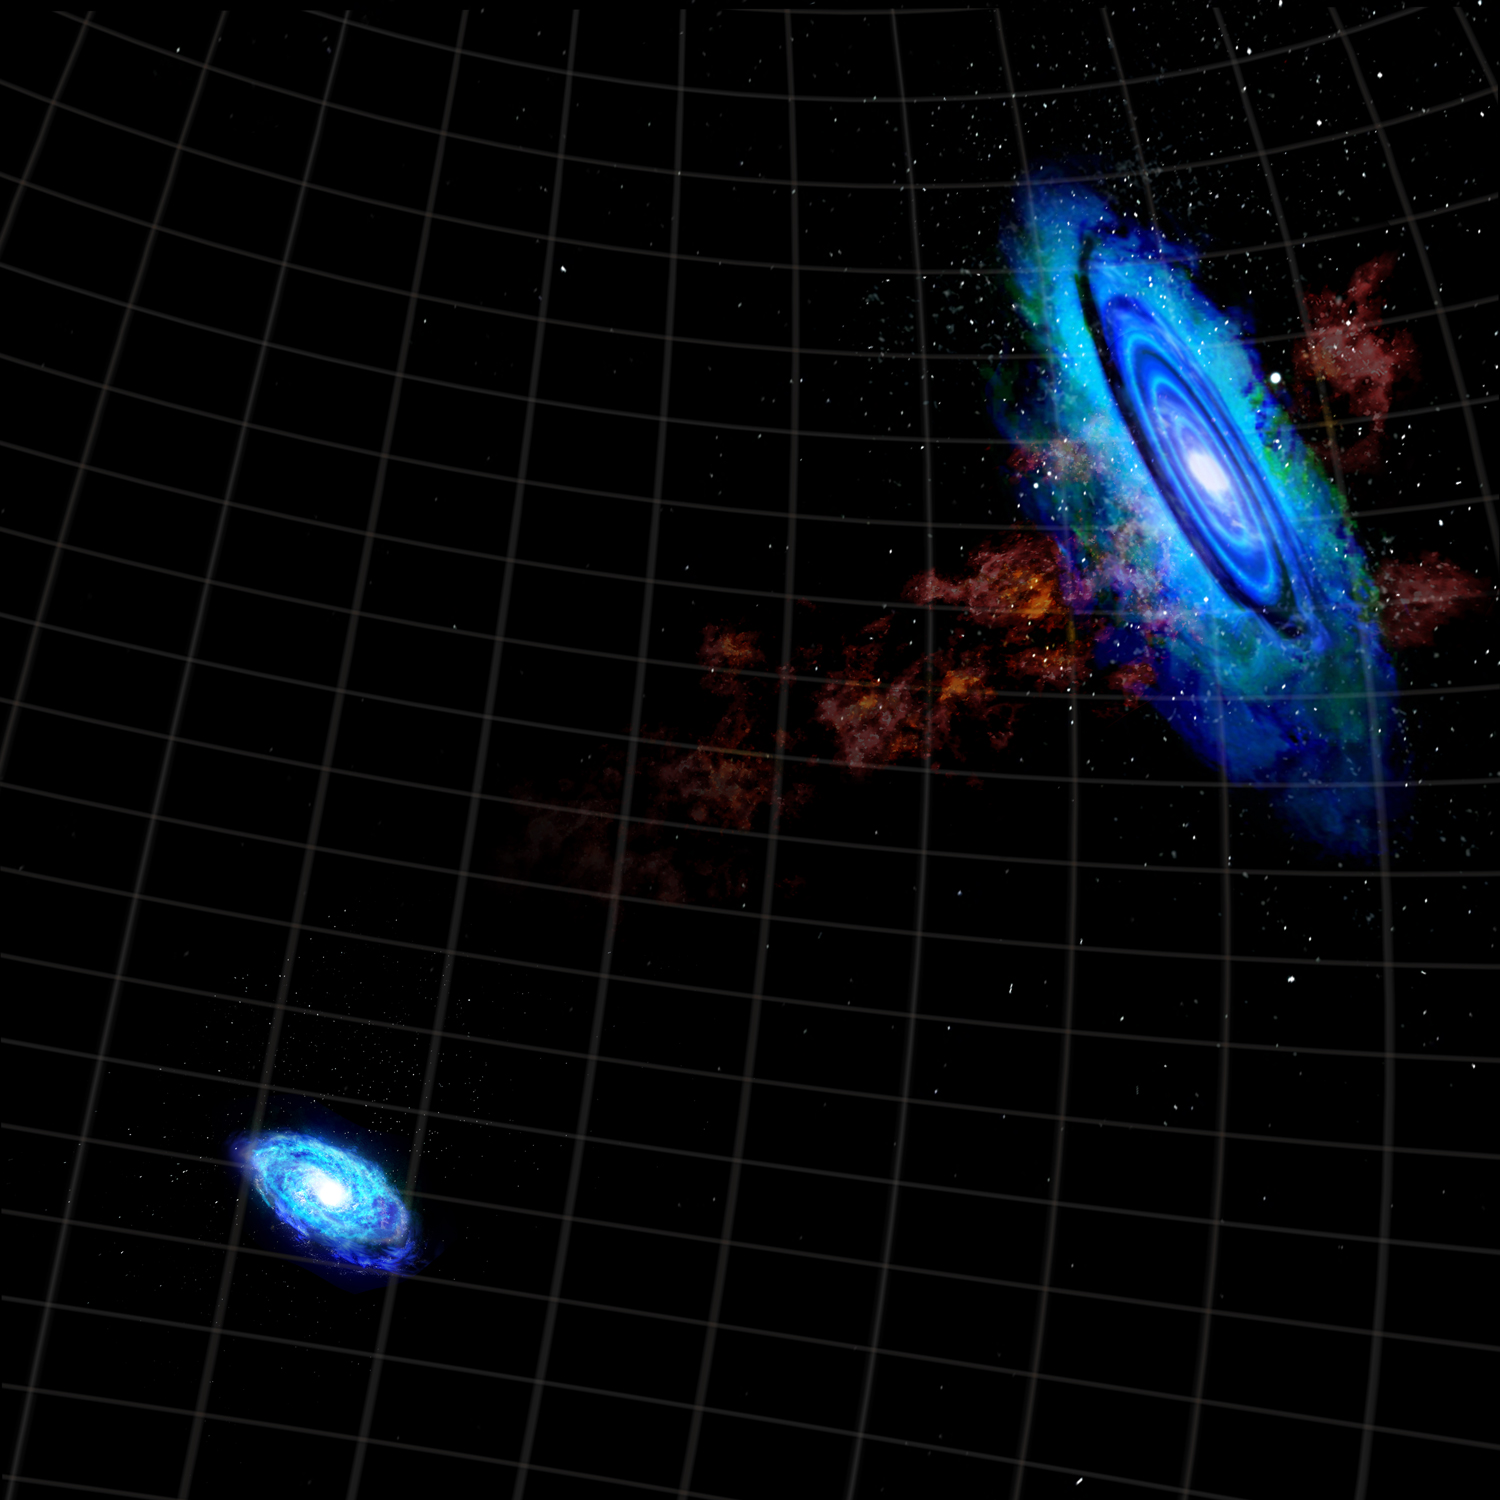 An illustration of two galaxies, one being the Triangulum Galaxy in the lower left, and the larger Andromeda Galaxy in the upper right. The galaxies appear as nebulous blue spirals. A gas cloud bridge, colored as wispy clumps of red, is seen extending from the larger galaxy towards the smaller one. 